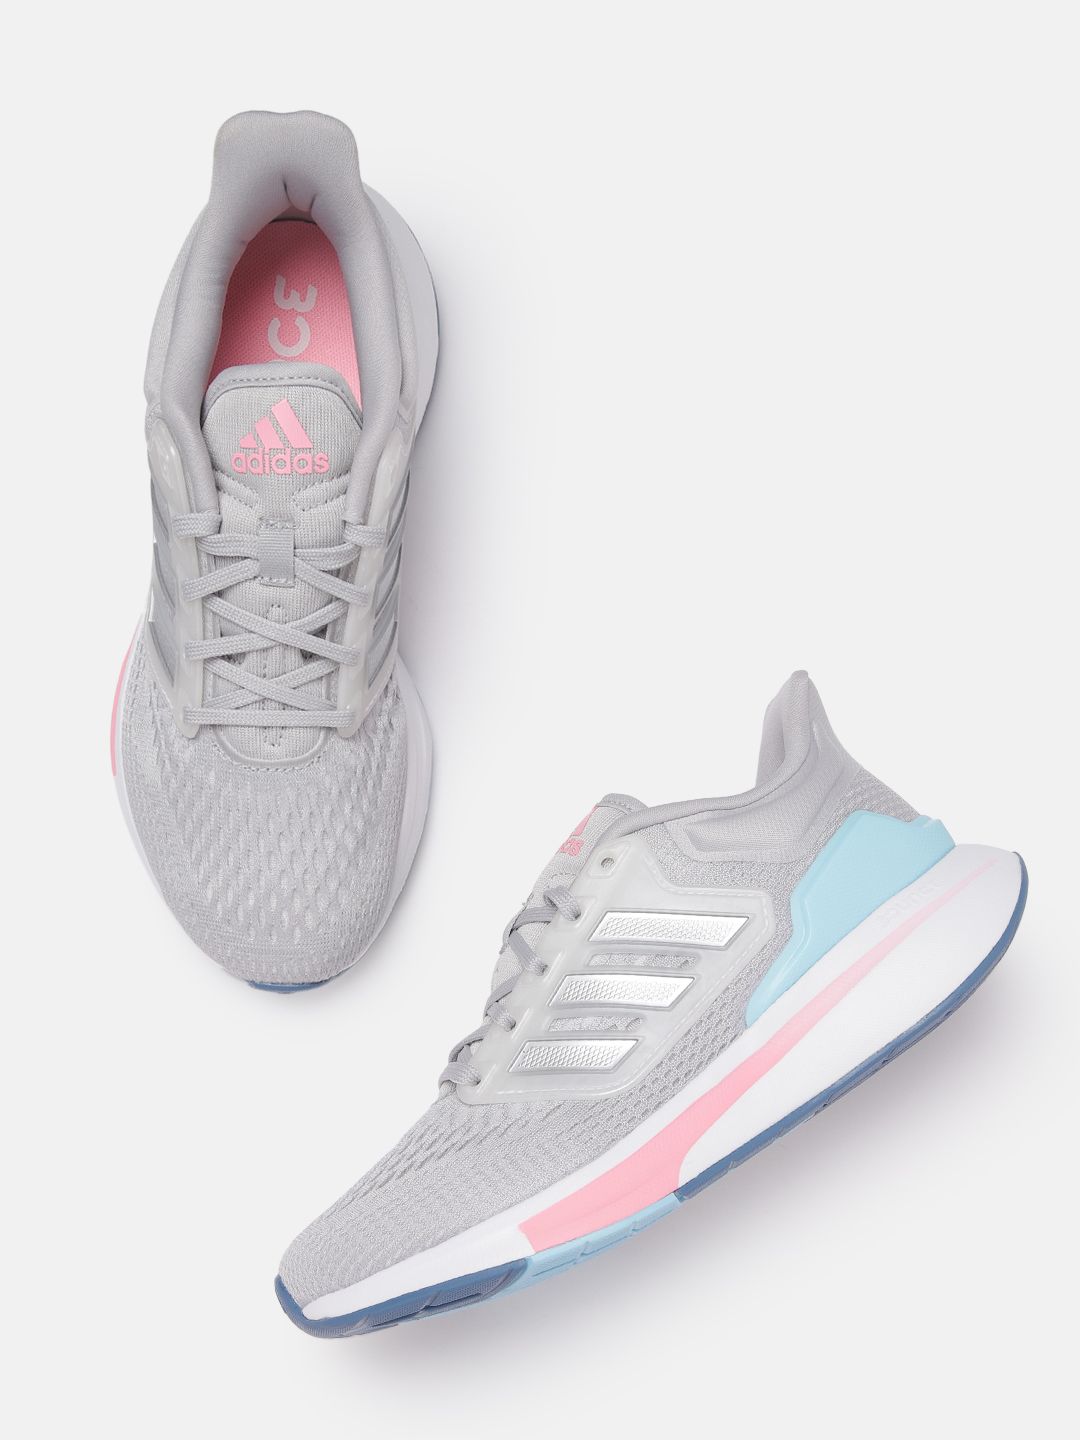 ADIDAS Women Grey Woven Design EQ21 Running Shoes Price in India